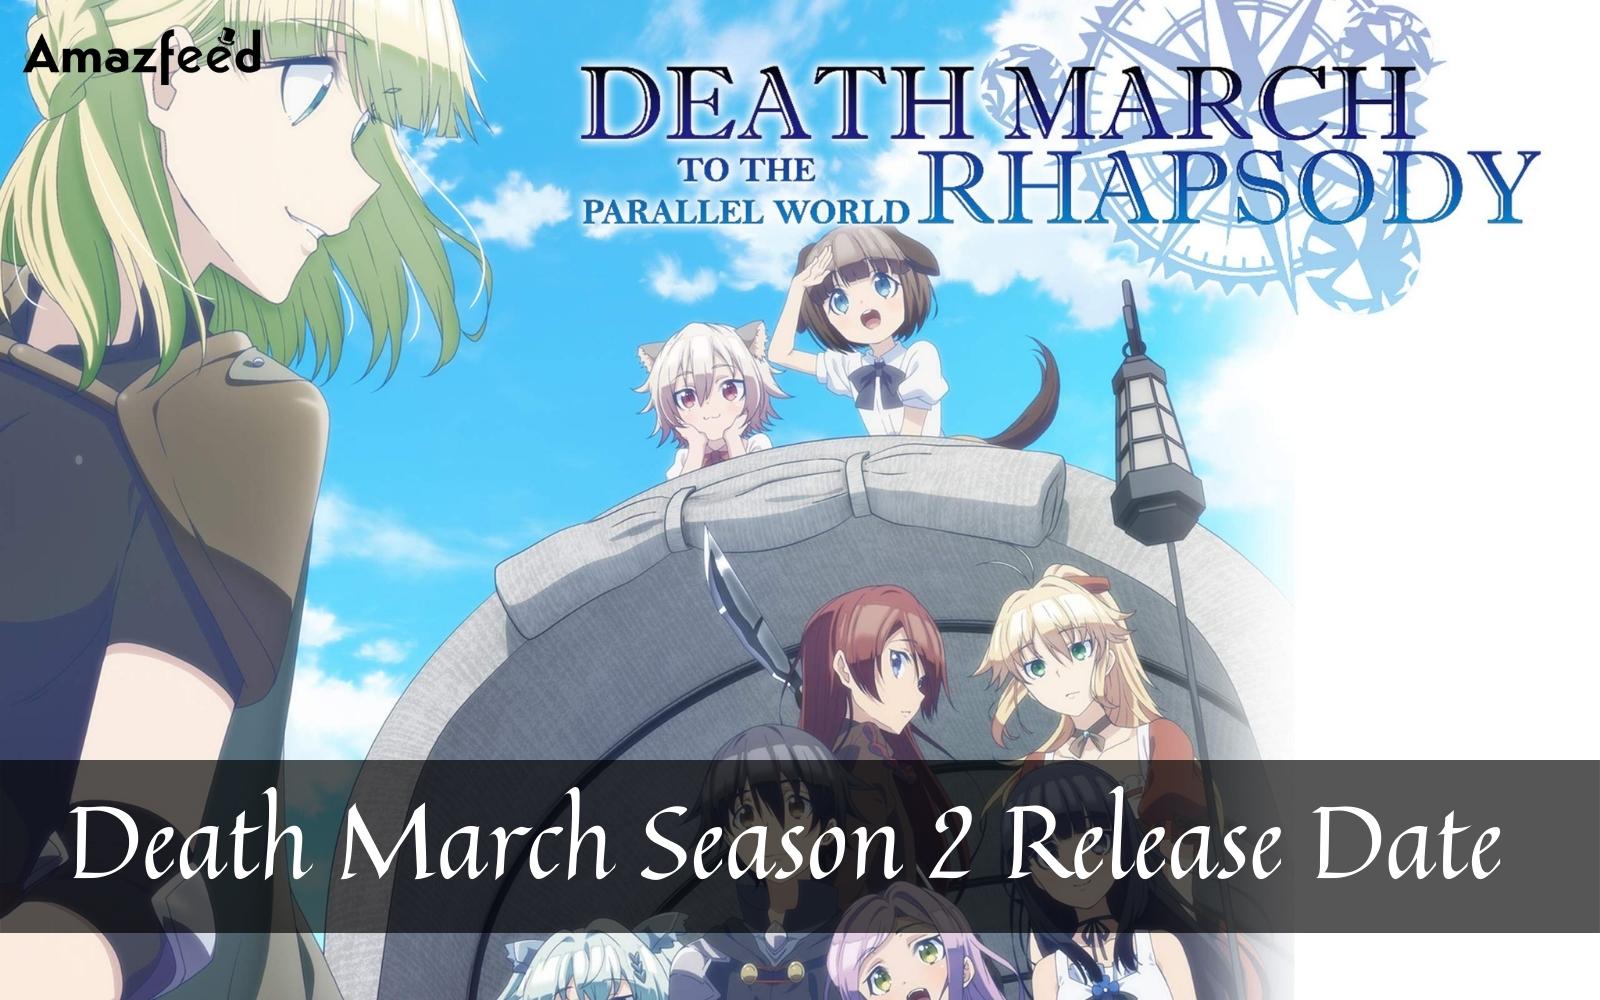 Will Death March season 2 ever happen or will it be canceled by